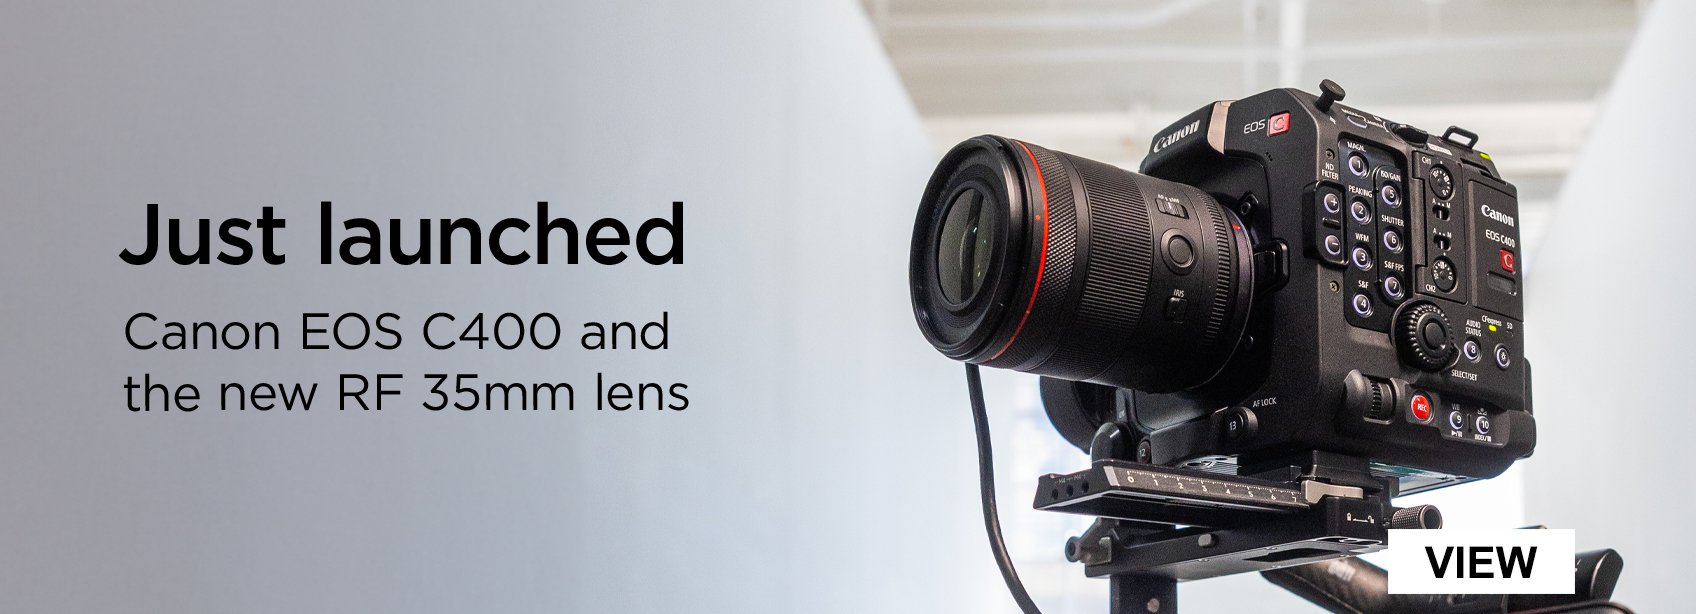 just launched - New camcorder and lens from canon